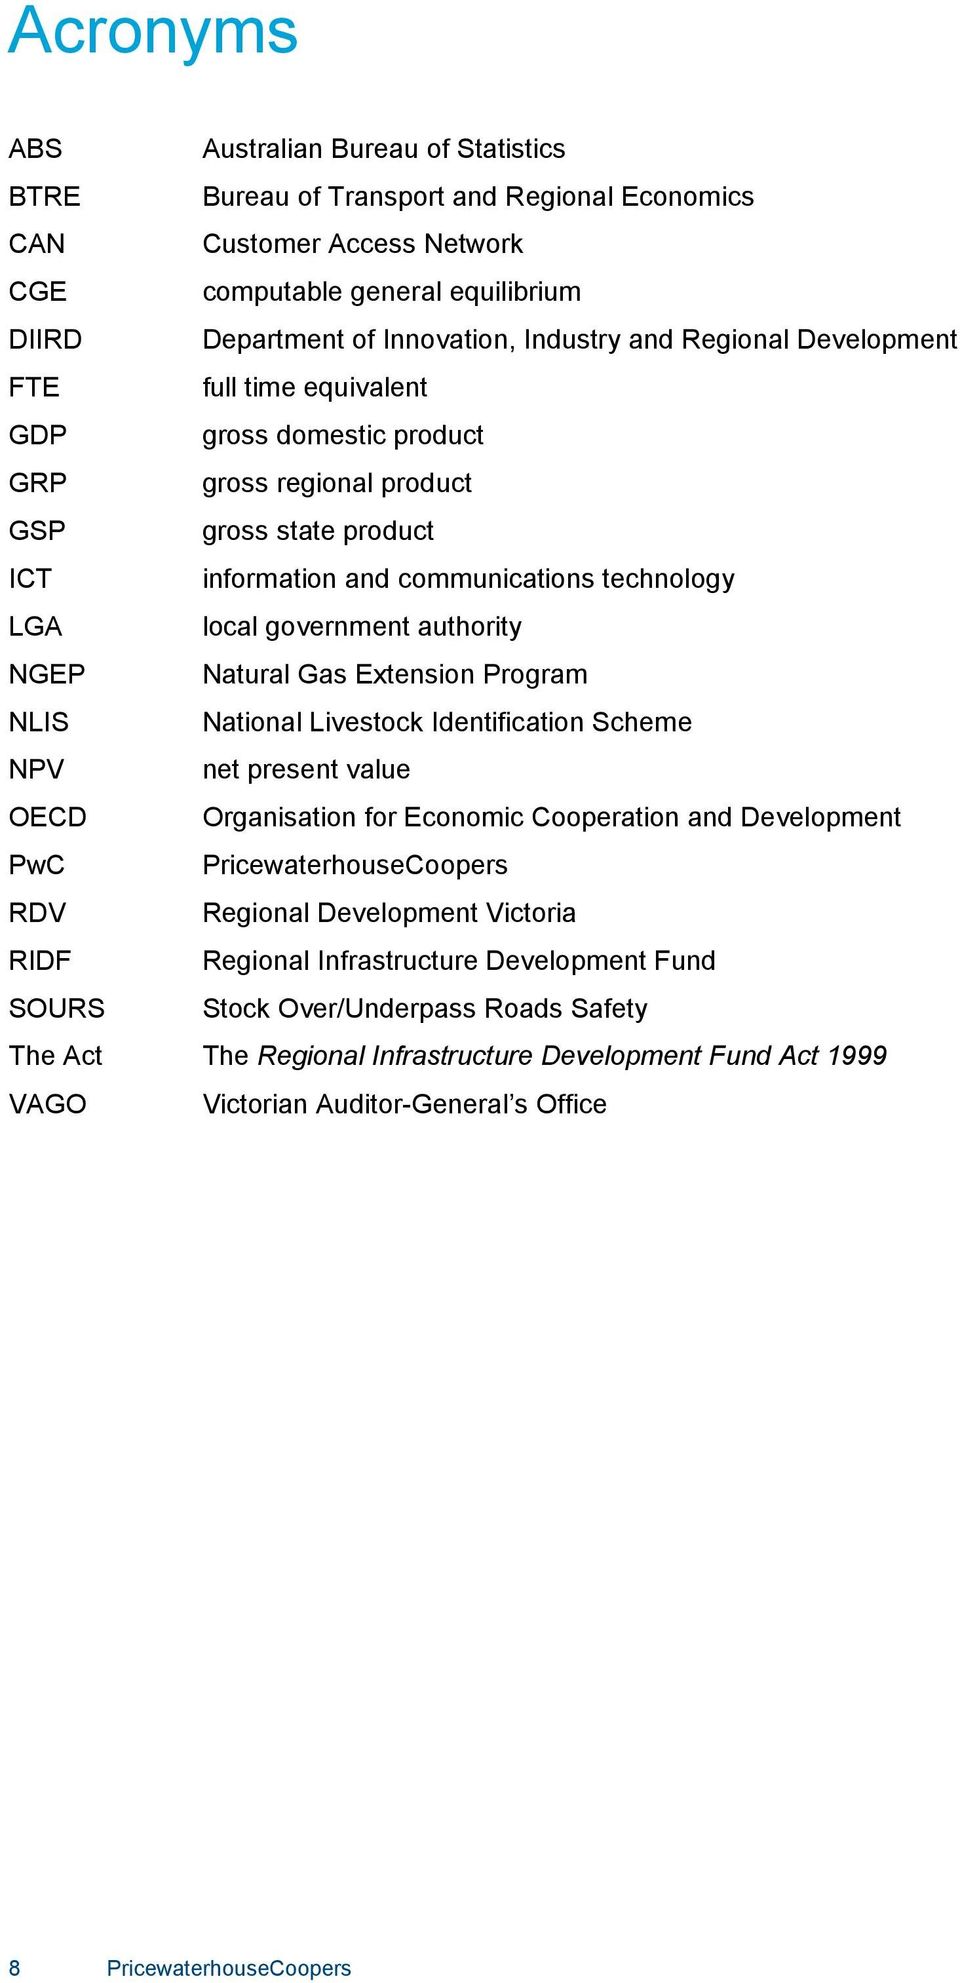 authority NGEP Natural Gas Extension Program NLIS National Livestock Identification Scheme NPV net present value OECD Organisation for Economic Cooperation and Development PwC PricewaterhouseCoopers